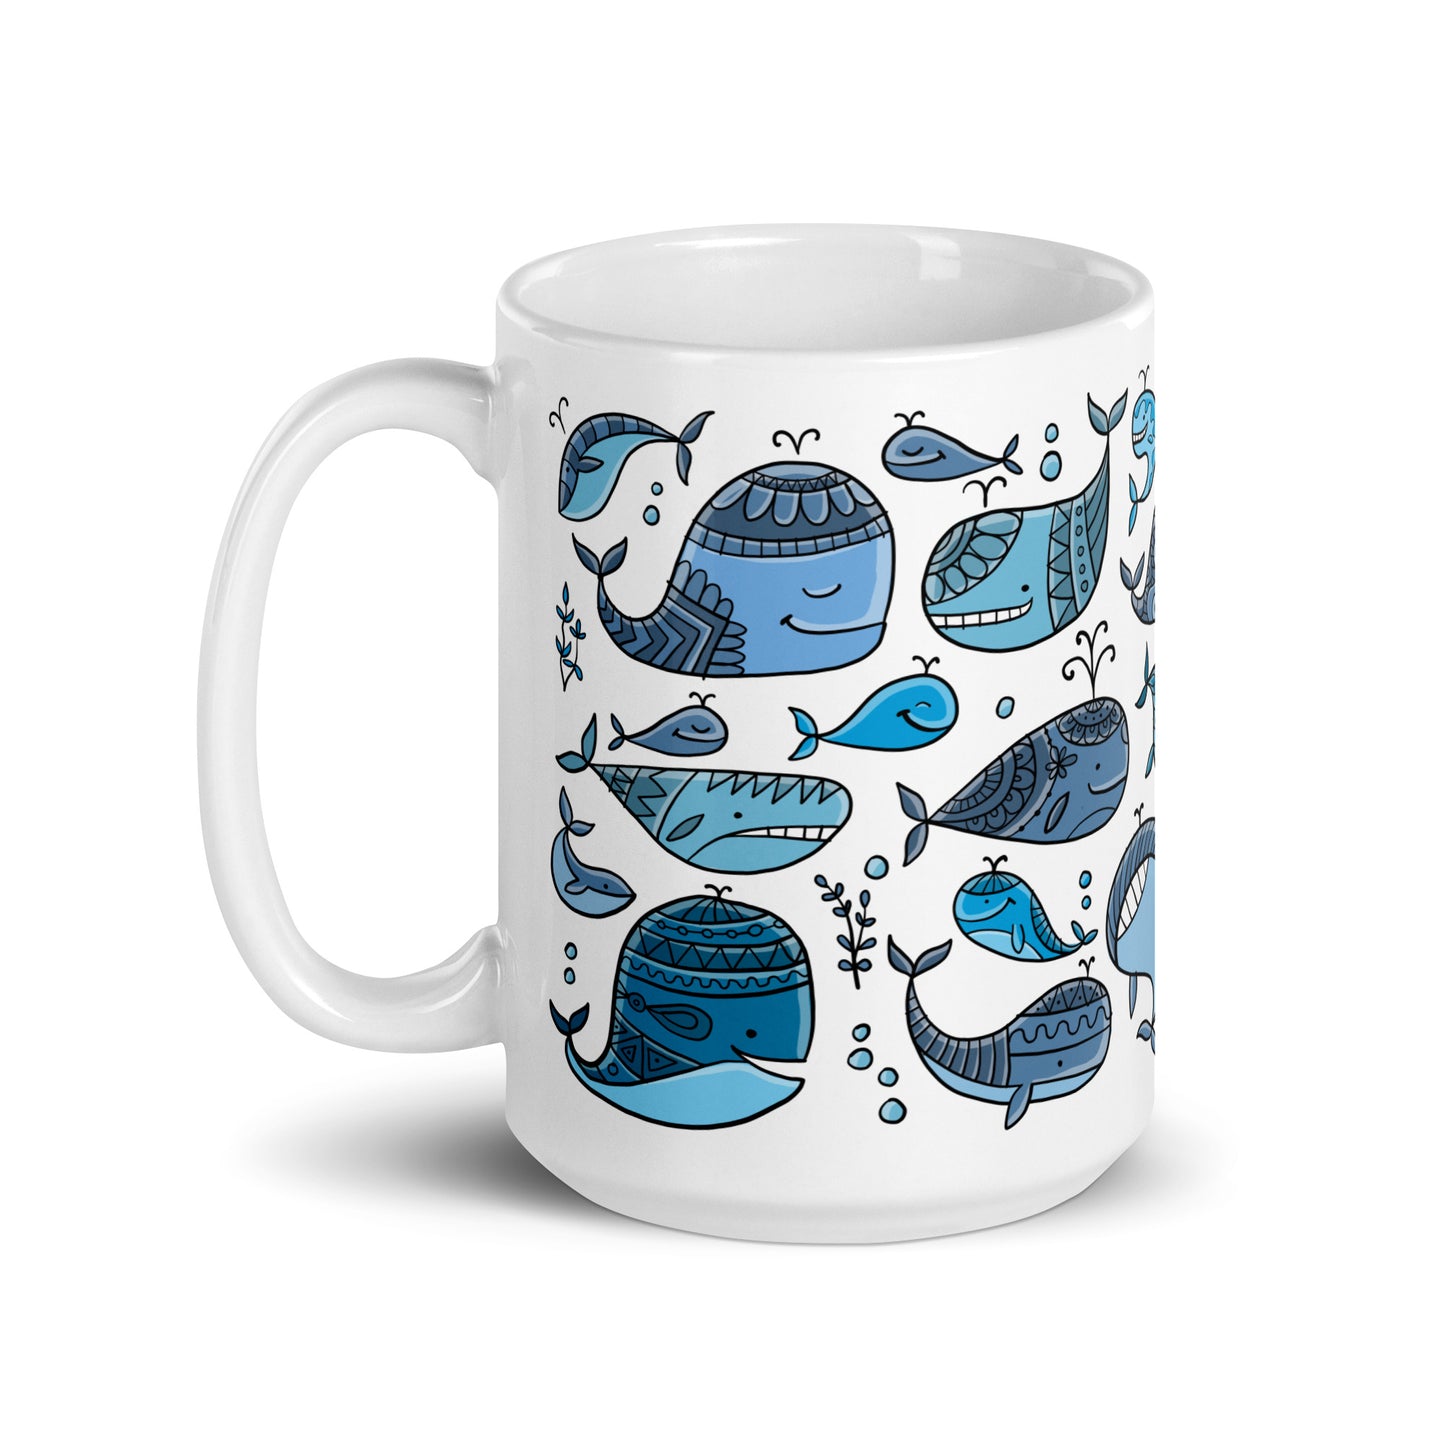 A charming ceramic gift mug 15 oz celebrating Whales Day. Funny whales families. Perfect for whale enthusiasts and marine life lovers.